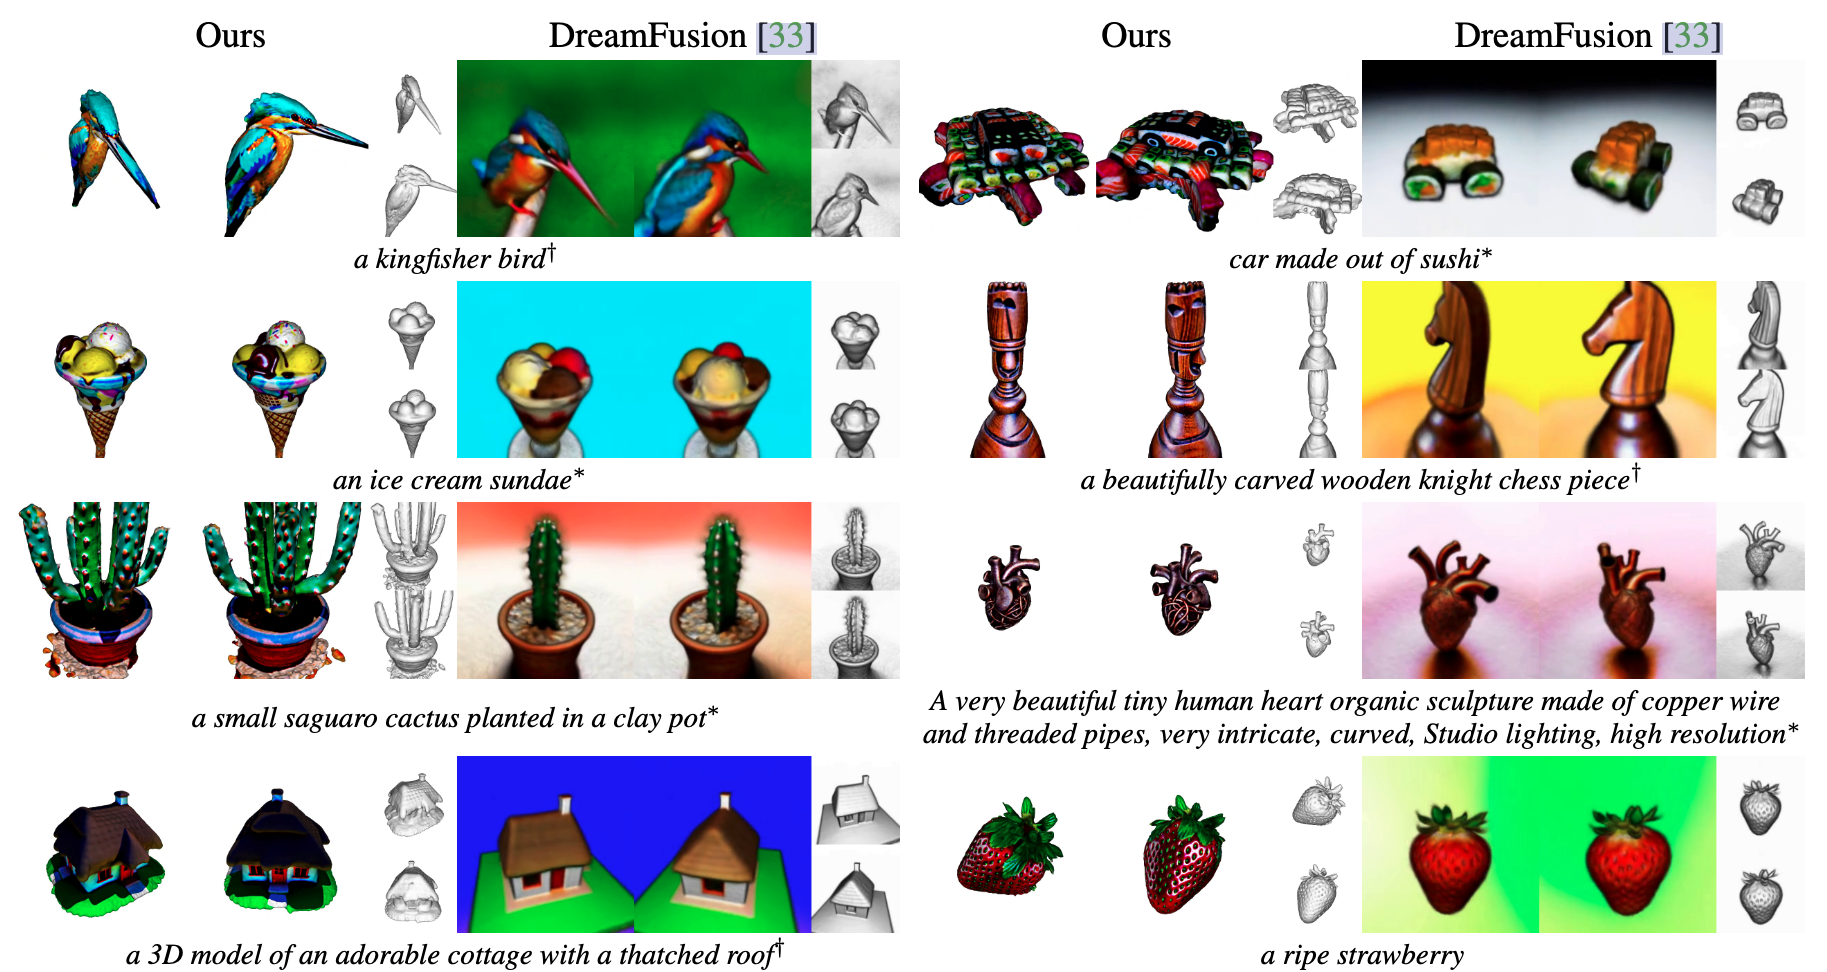 Fig 3. Qualitative comparison with DreamFusion [33].  We use the same text prompt as DreamFusion.  For each 3D model, we render it from two views, each rendered with no textures and the background removed to focus on the actual 3D shape.  For DreamFusion results, we obtain frames from videos published on the official webpage.  Compared to DreamFusion, our Magic3D generates higher quality 3D shapes both geometrically and textured.  *A DSLR photo of… †A scaled-down DSLR photo of…